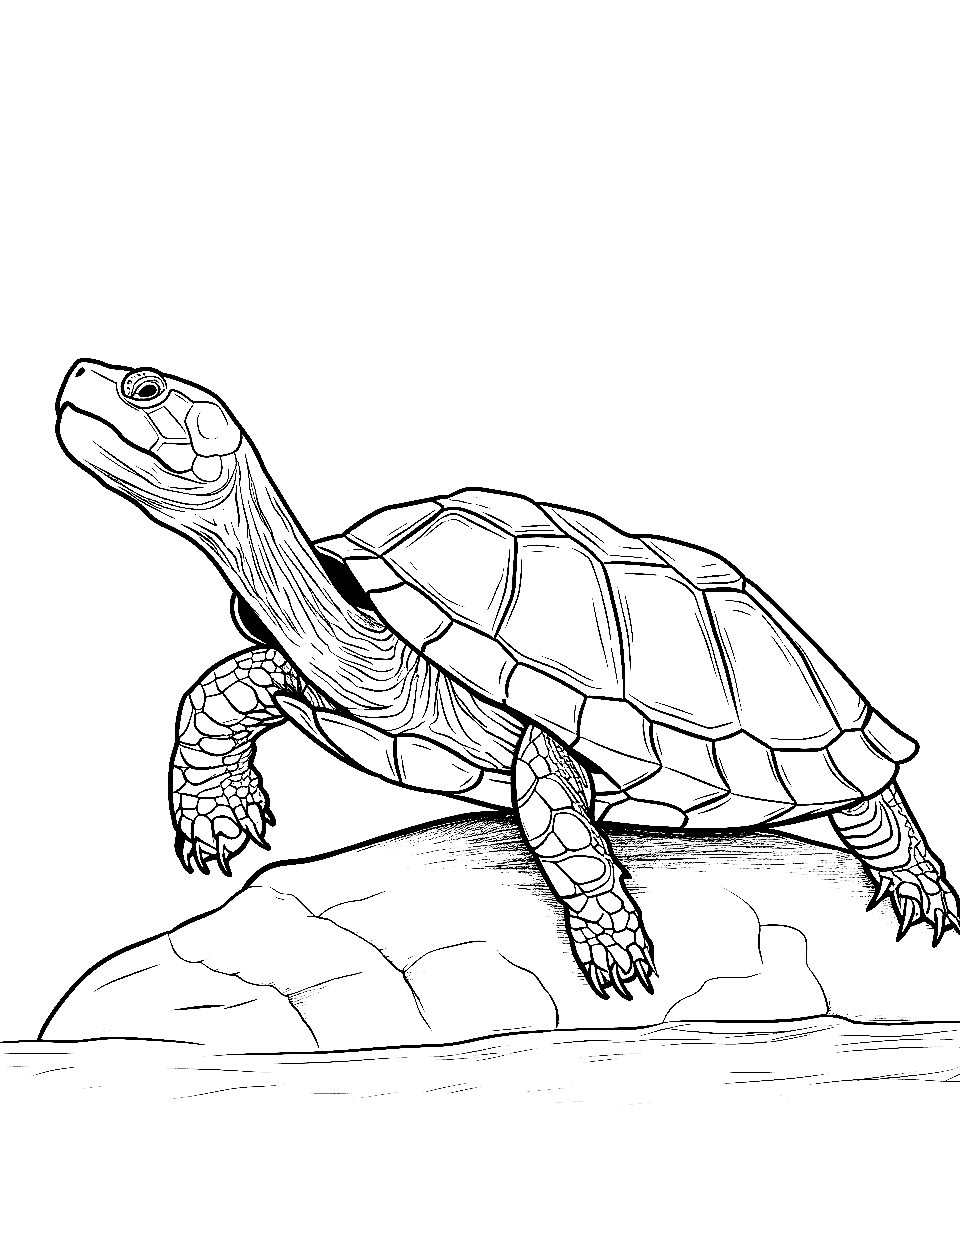 Red-Eared Friend Turtle Coloring Page - A red-eared slider turtle basking on a rock.